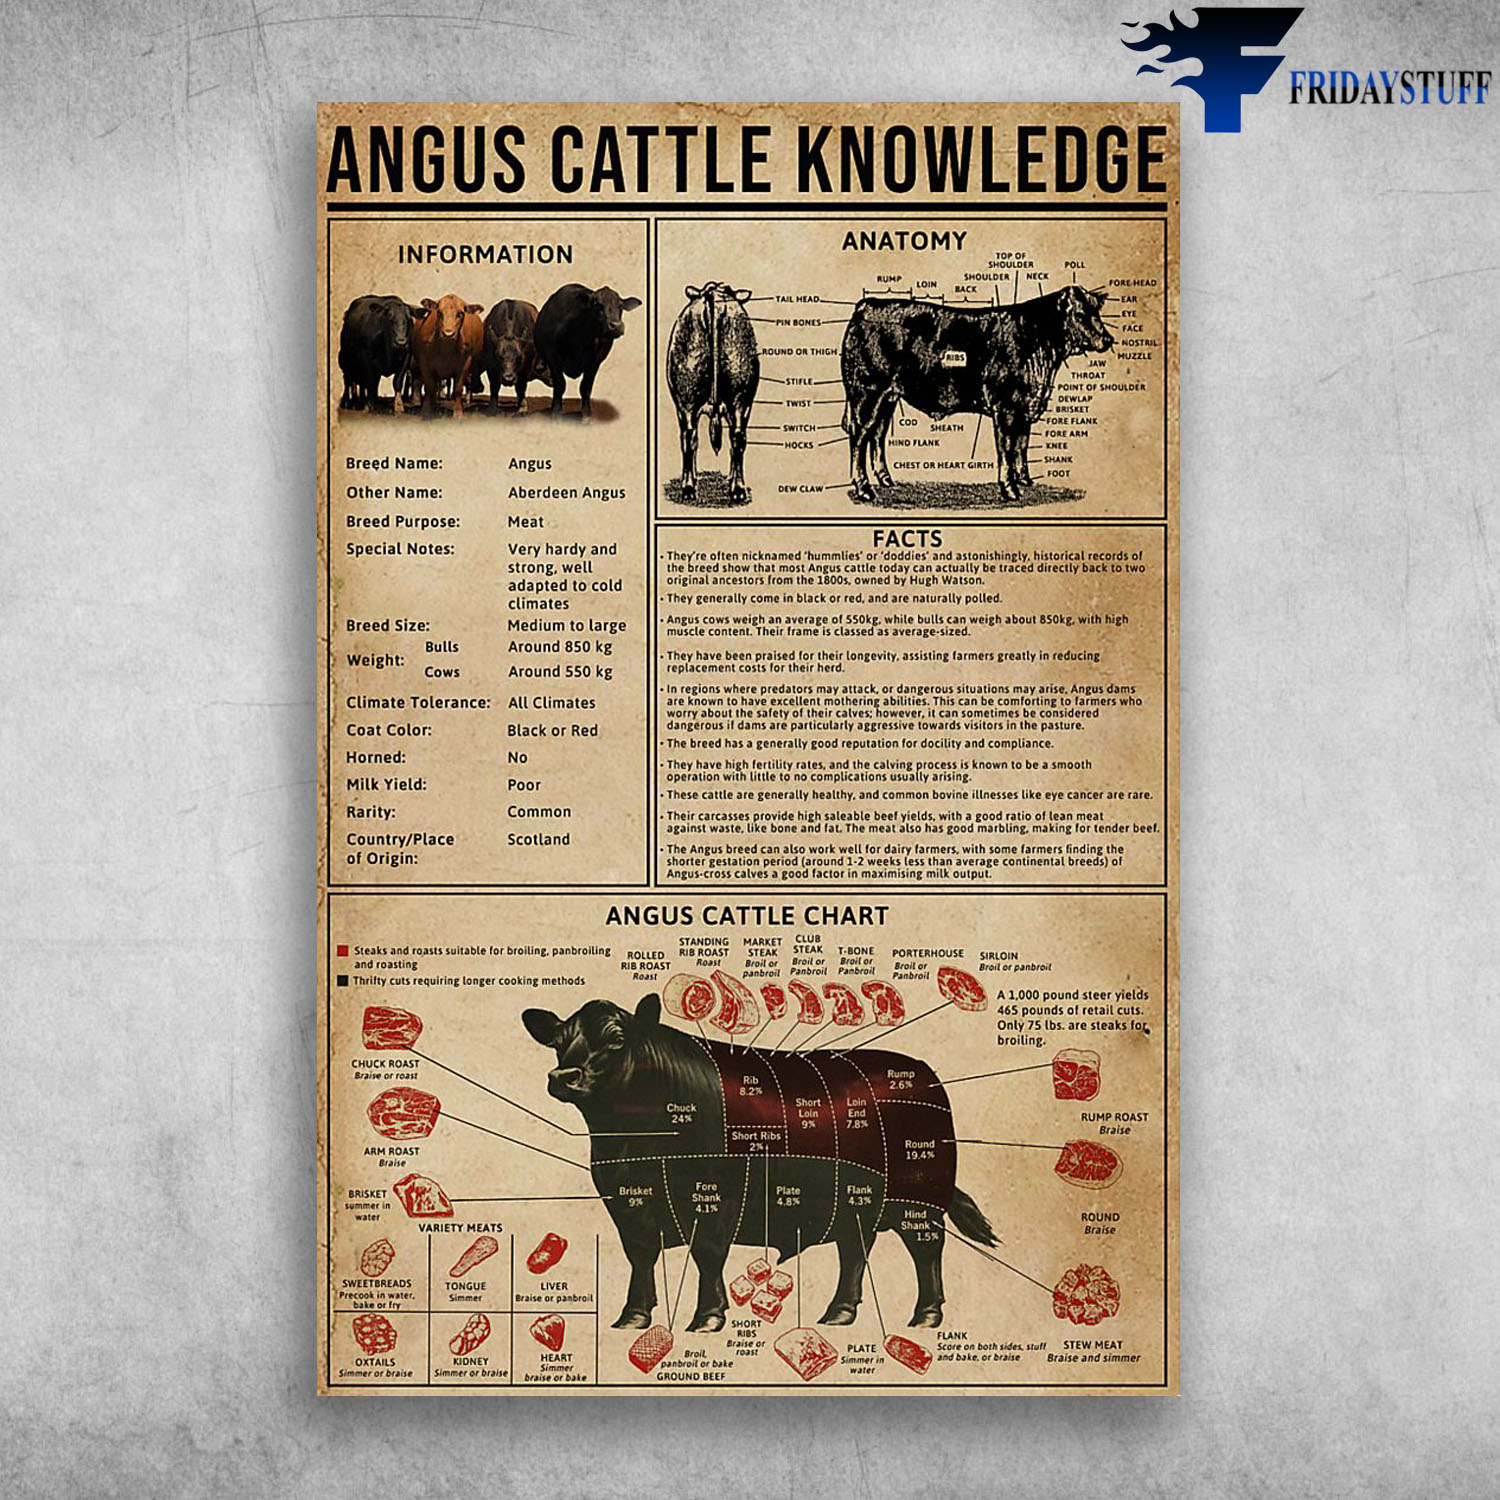 Angus Cattle Knowledge Angus Cattle Chart Angus Cattle Anatomy